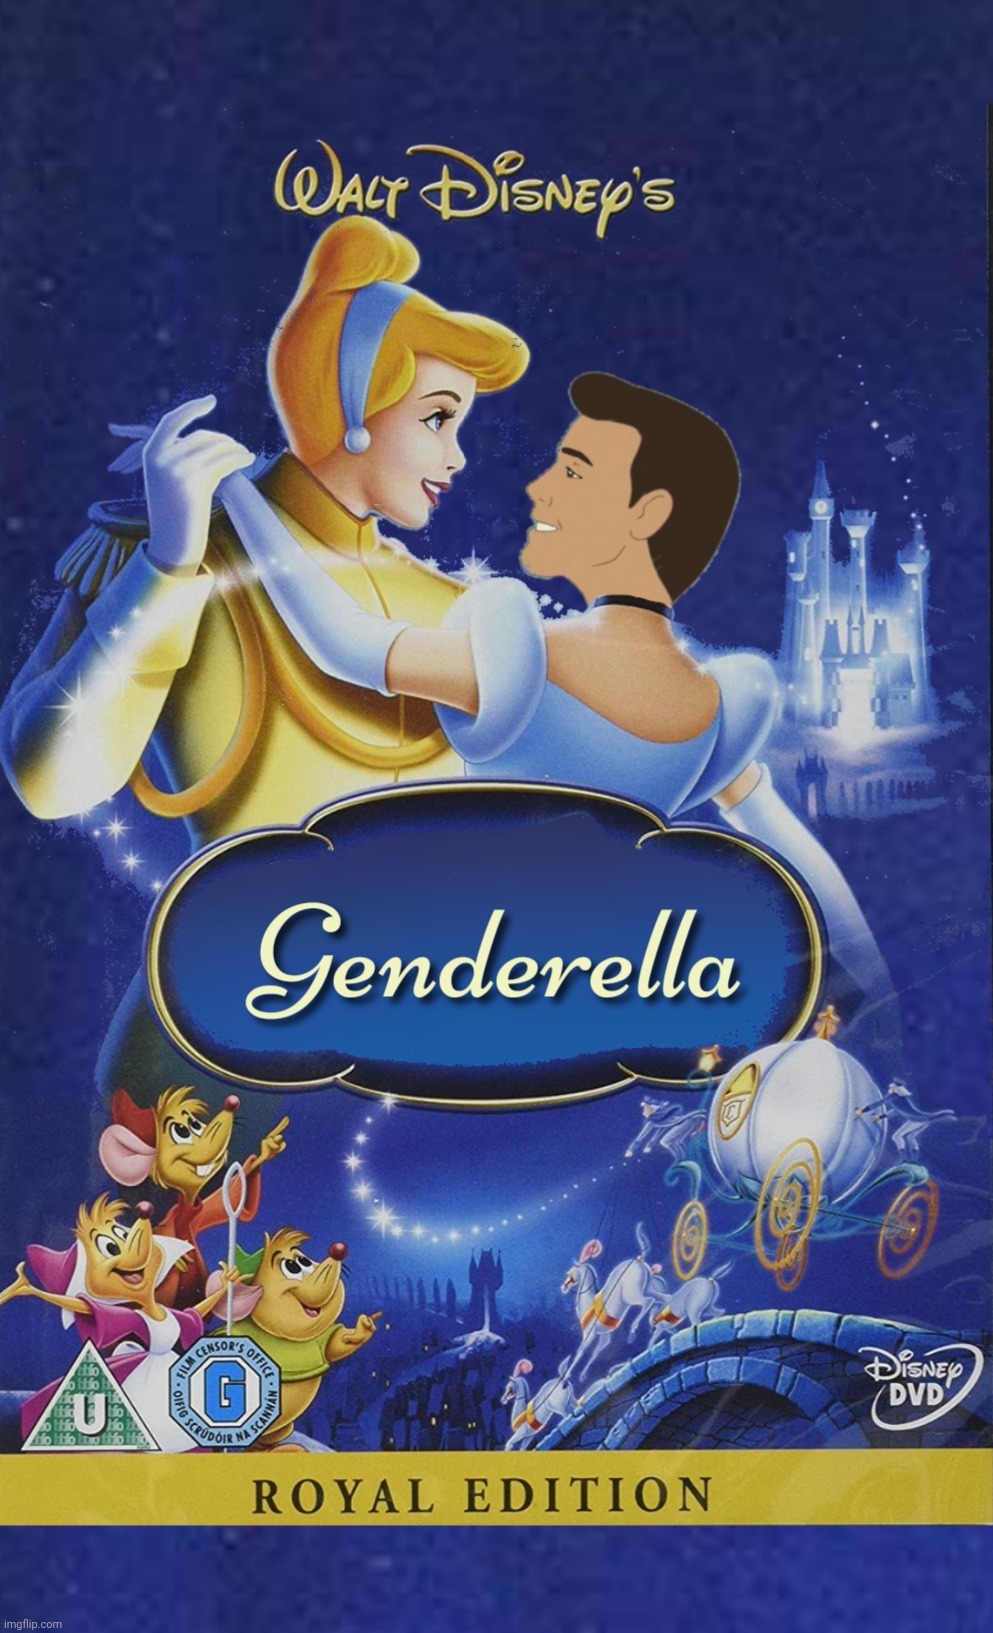 Bad Photoshop Sunday presents:  For those that prefer their fairy godmother with a mustache | image tagged in bad photoshop sunday,cinderella,cinderella fairy godmother,genderella,disney | made w/ Imgflip meme maker